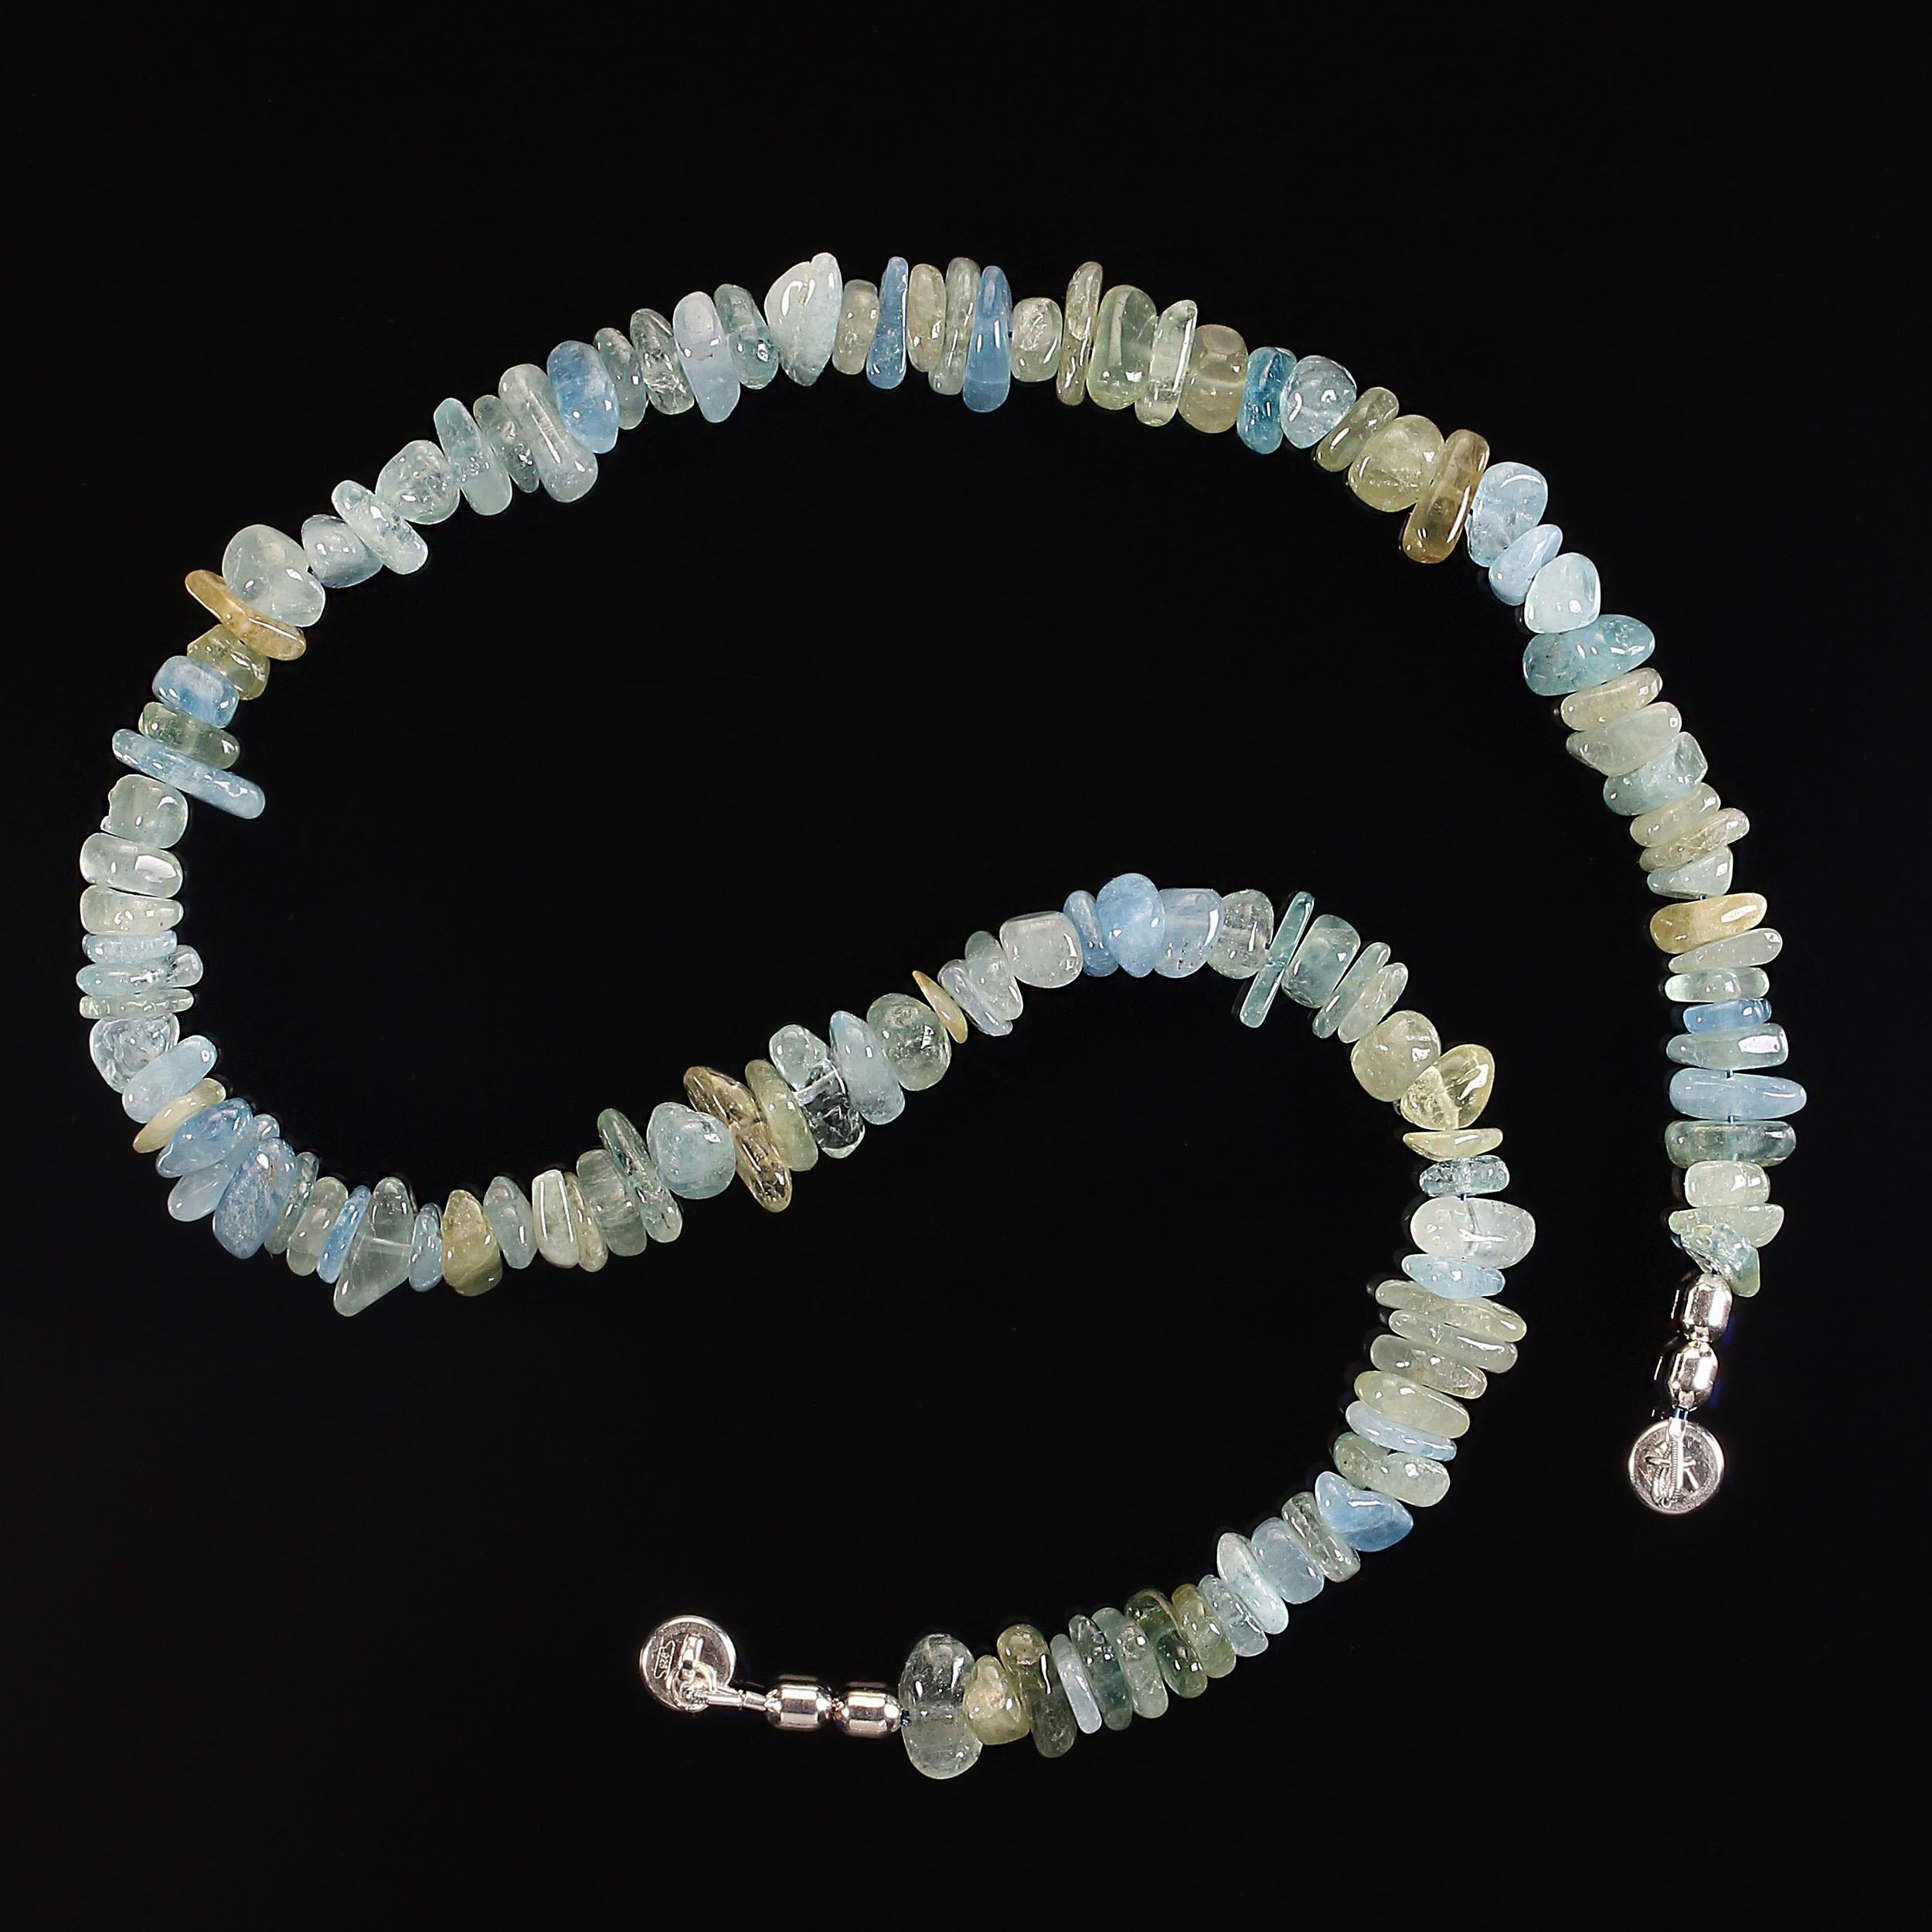 18 Inch gorgeous aquamarine necklace with sterling silver easy to use magnetic clasp.  These so beautiful, highly polished, glowing, random sized aquamarine are medium to deep translucent blue and green. Remember to always slide apart magnets.  Do